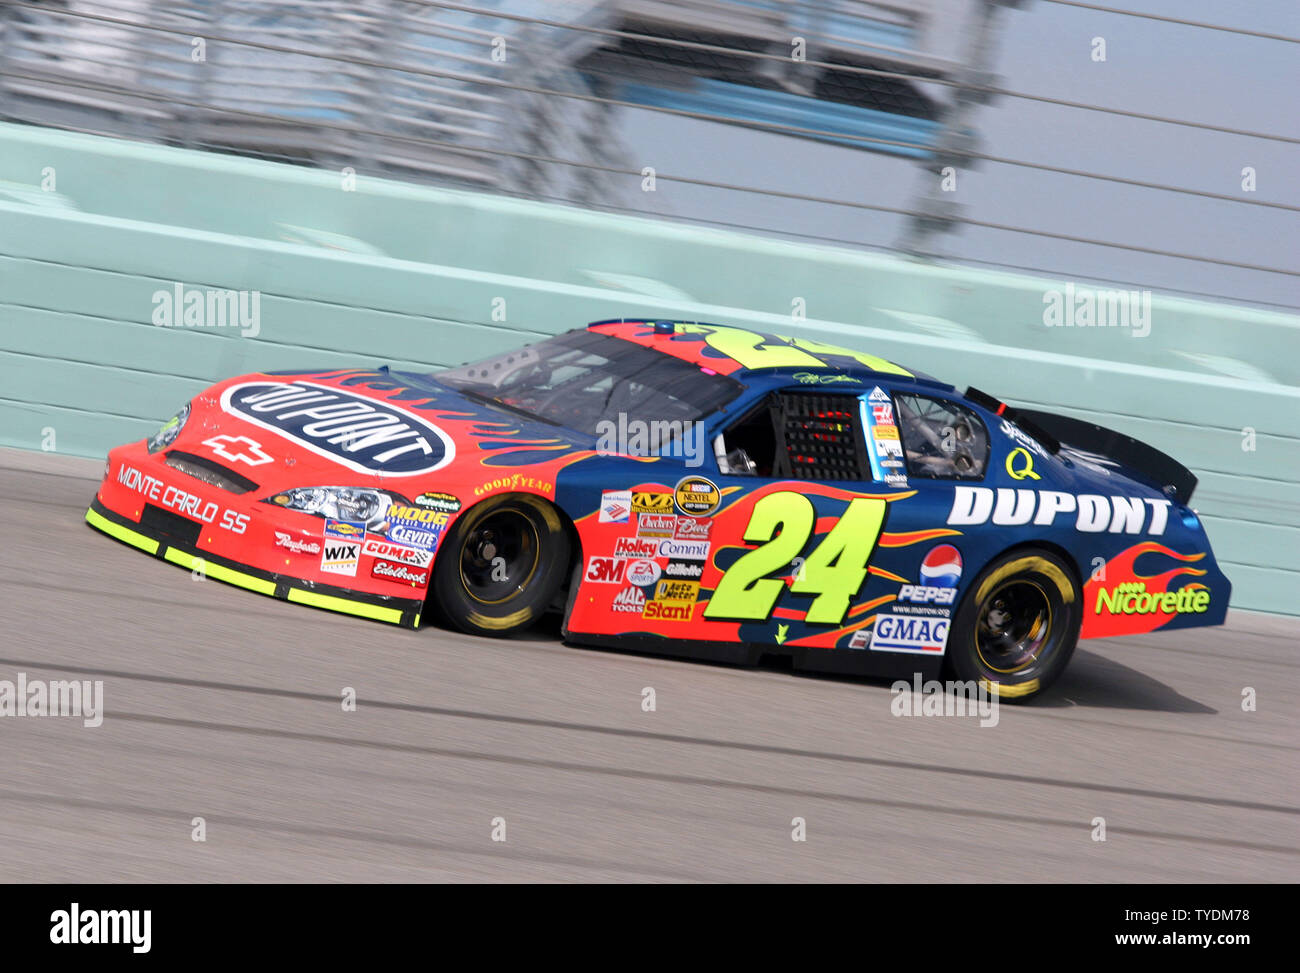 Jeff Gordon runs through turn four during the Nextel Cup Practice at Homestead-Miami Speedway in Homestead, Florida on November 18, 2006. (UPI Photo/Malcolm Hope) Stock Photo